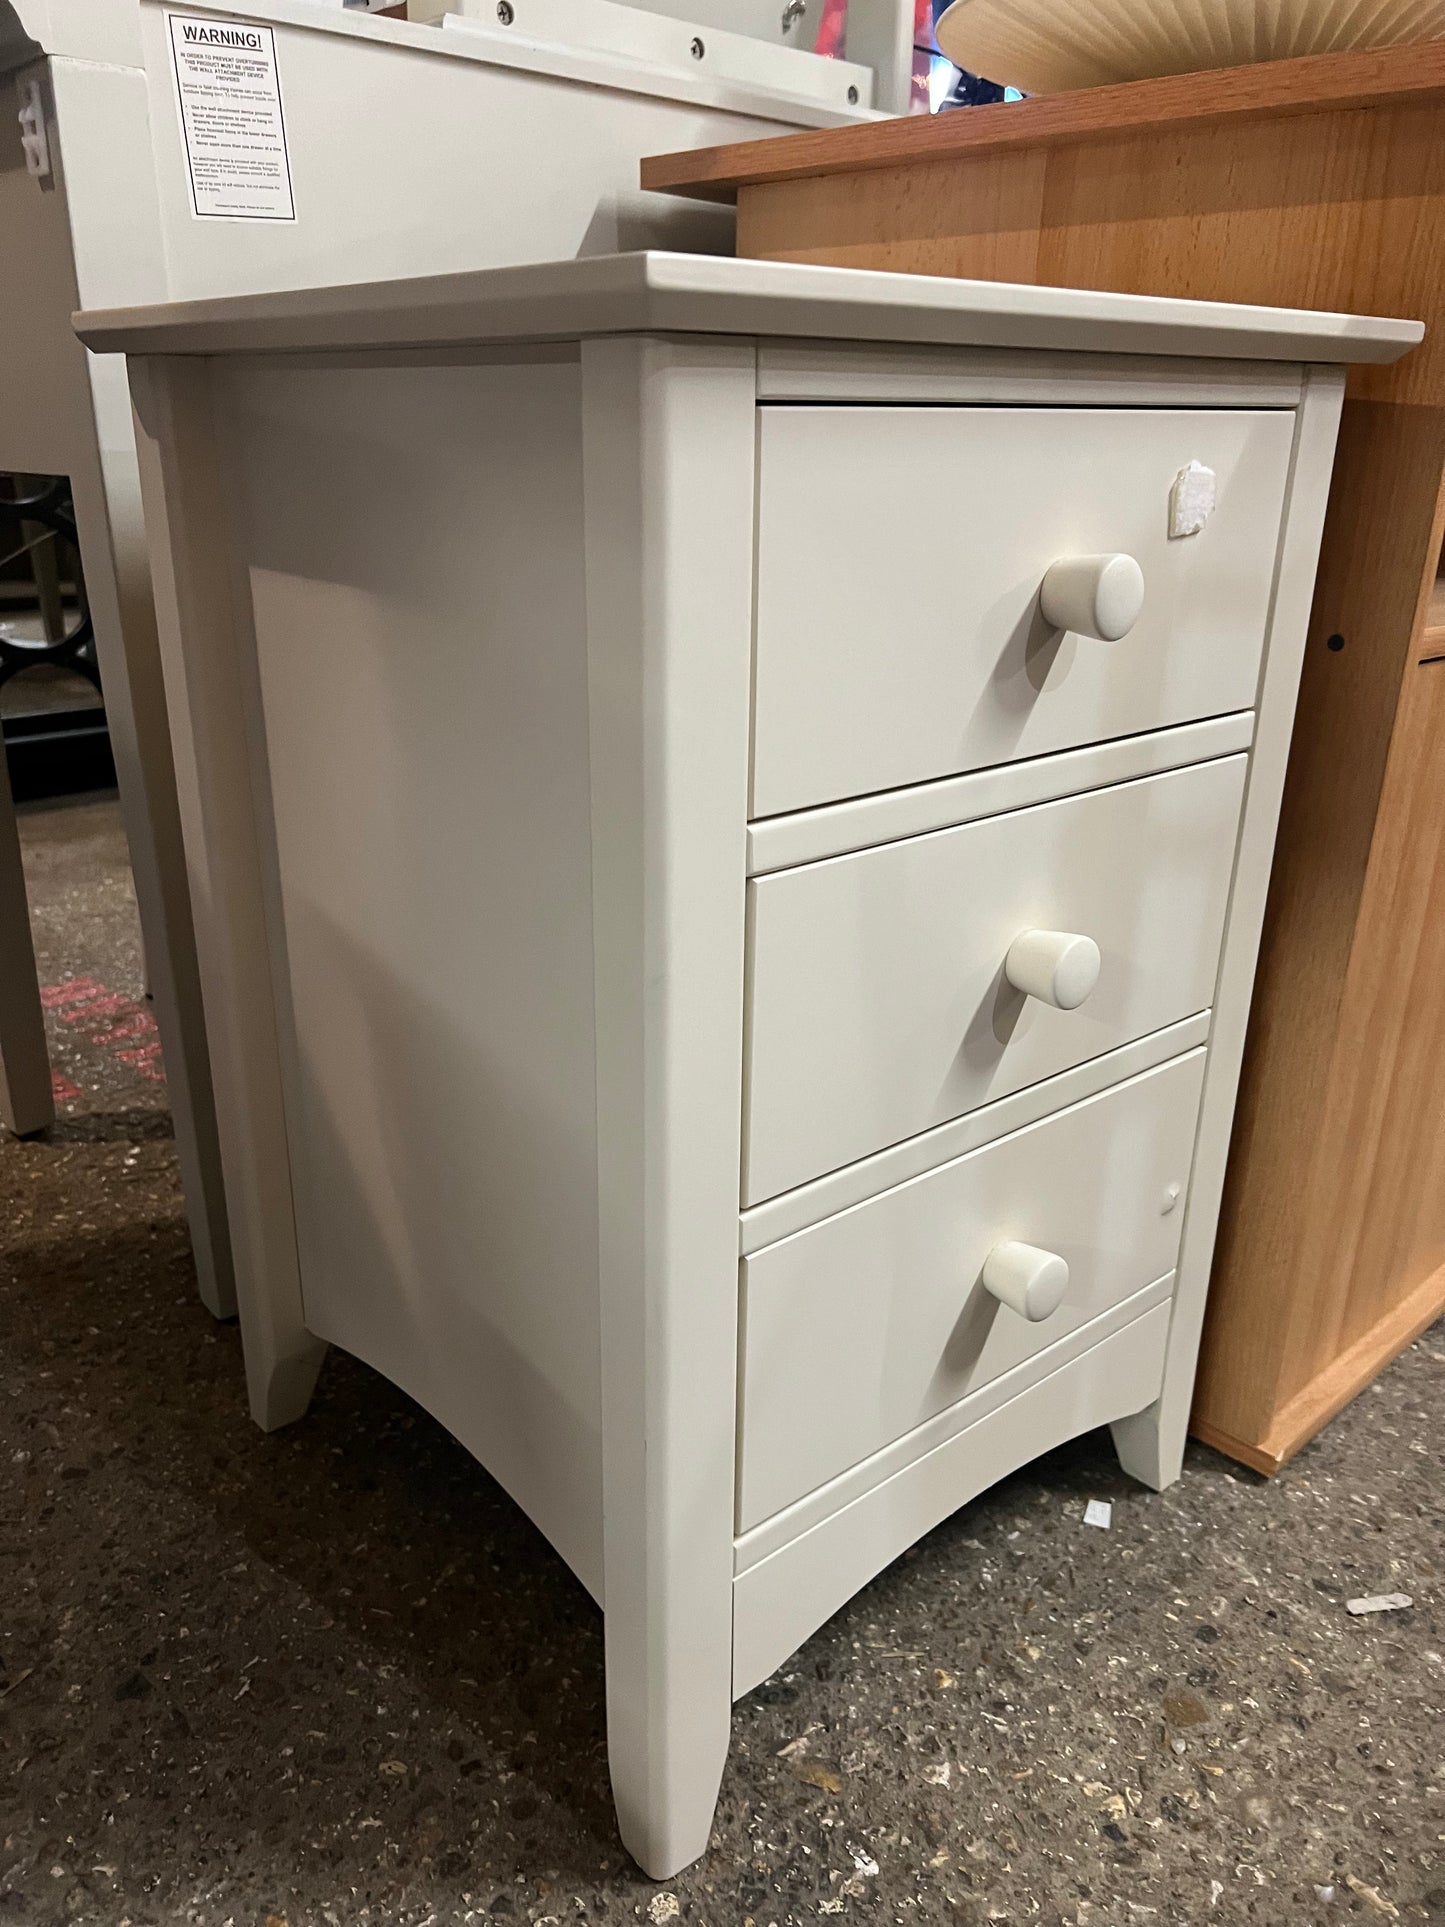 Cameo 3 Drawer Bedside Table, Stone White & Pine (R233)